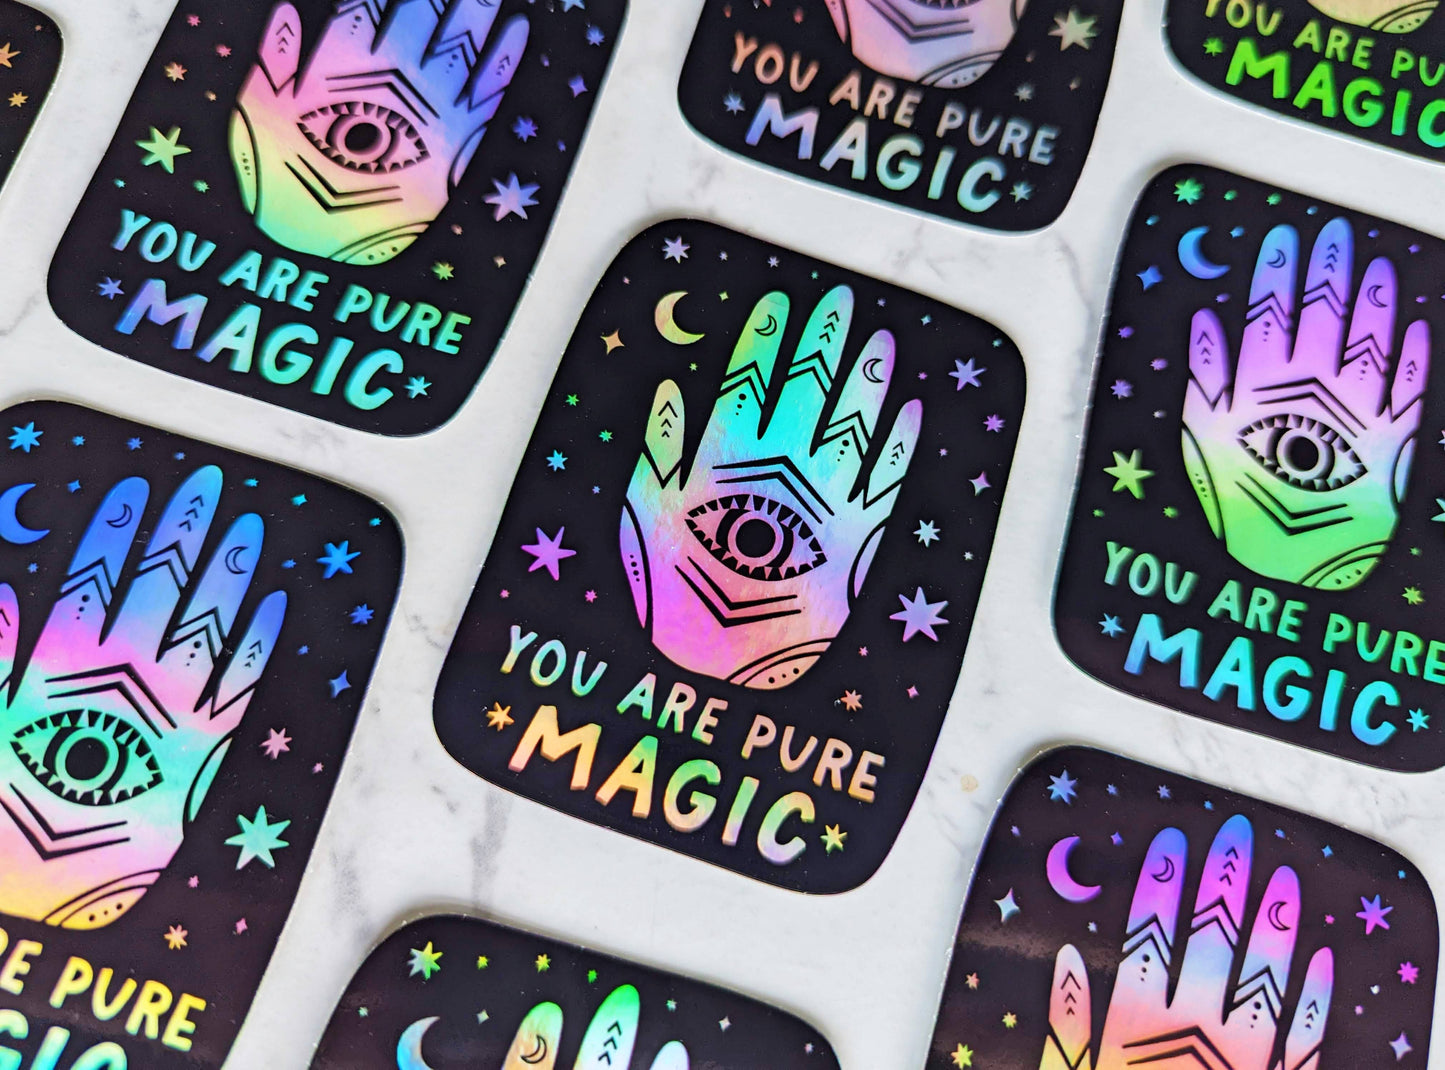 "You are Pure Magic" Hand Evil Eye Holographic Vinyl Sticker